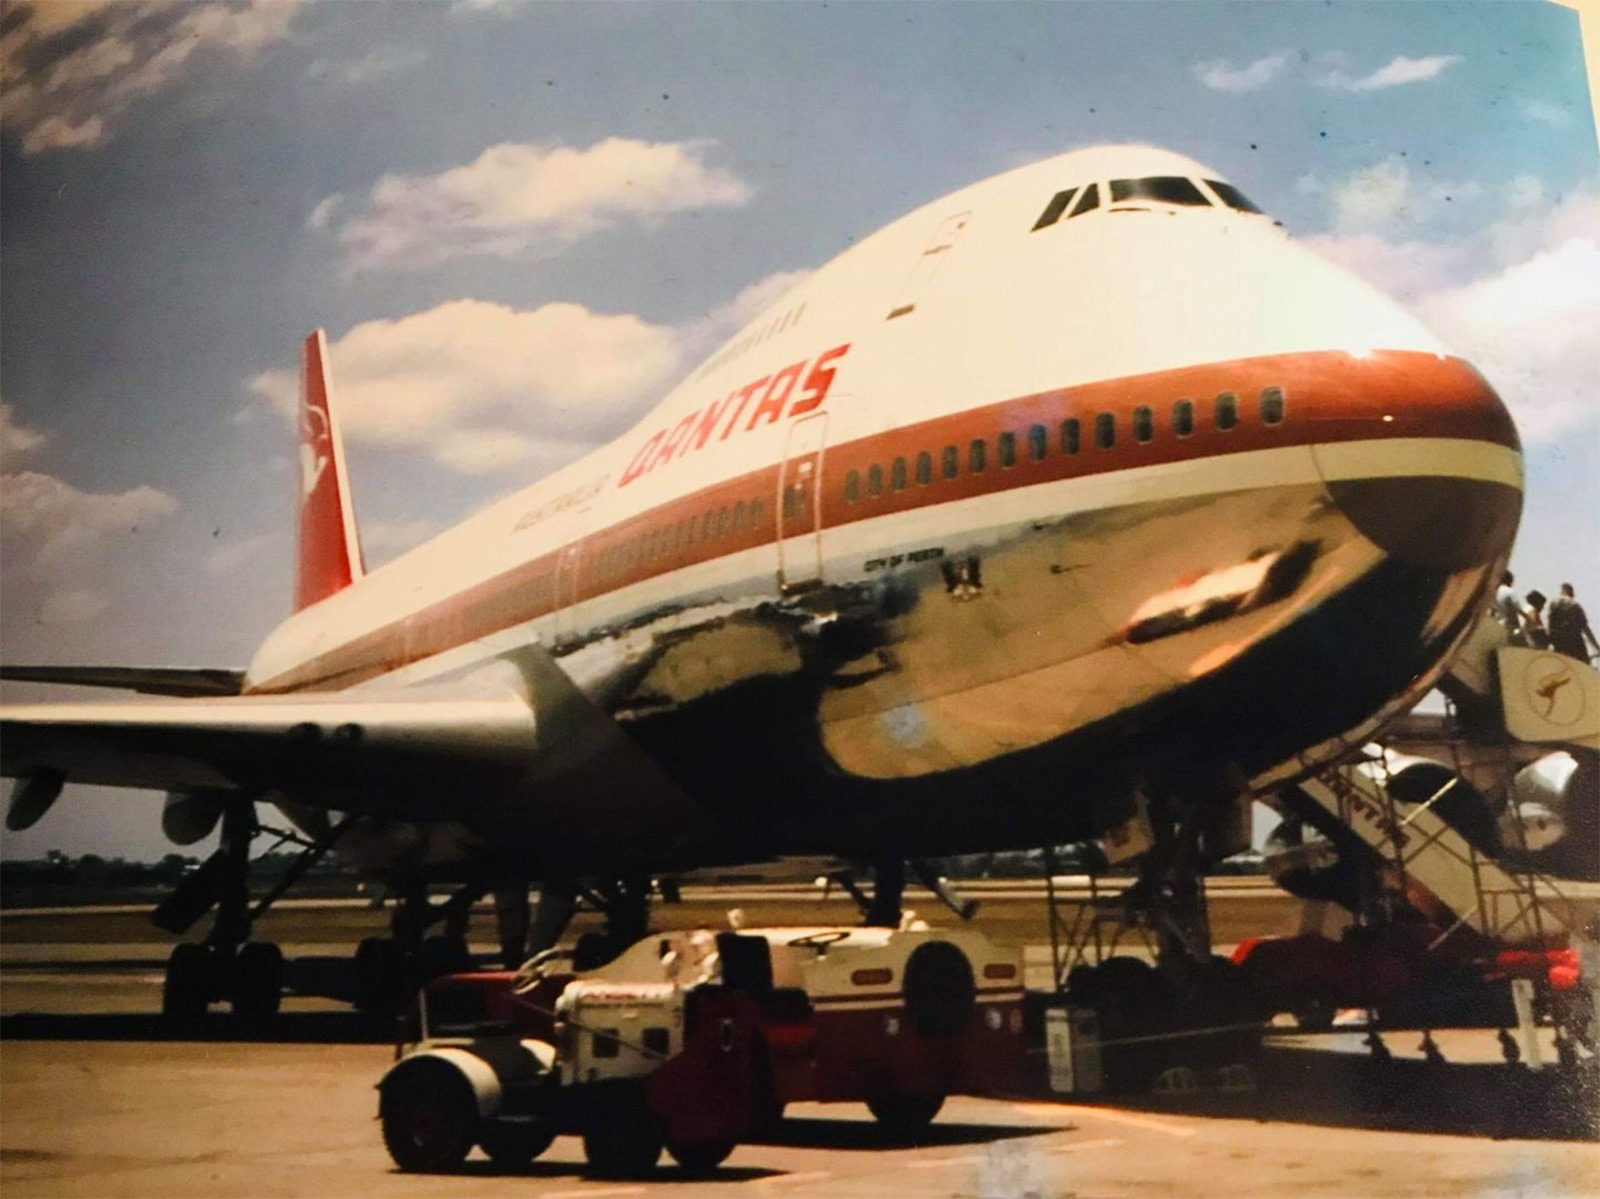 The iconic Boeing 747 emerged towards the end of the golden era of flying 